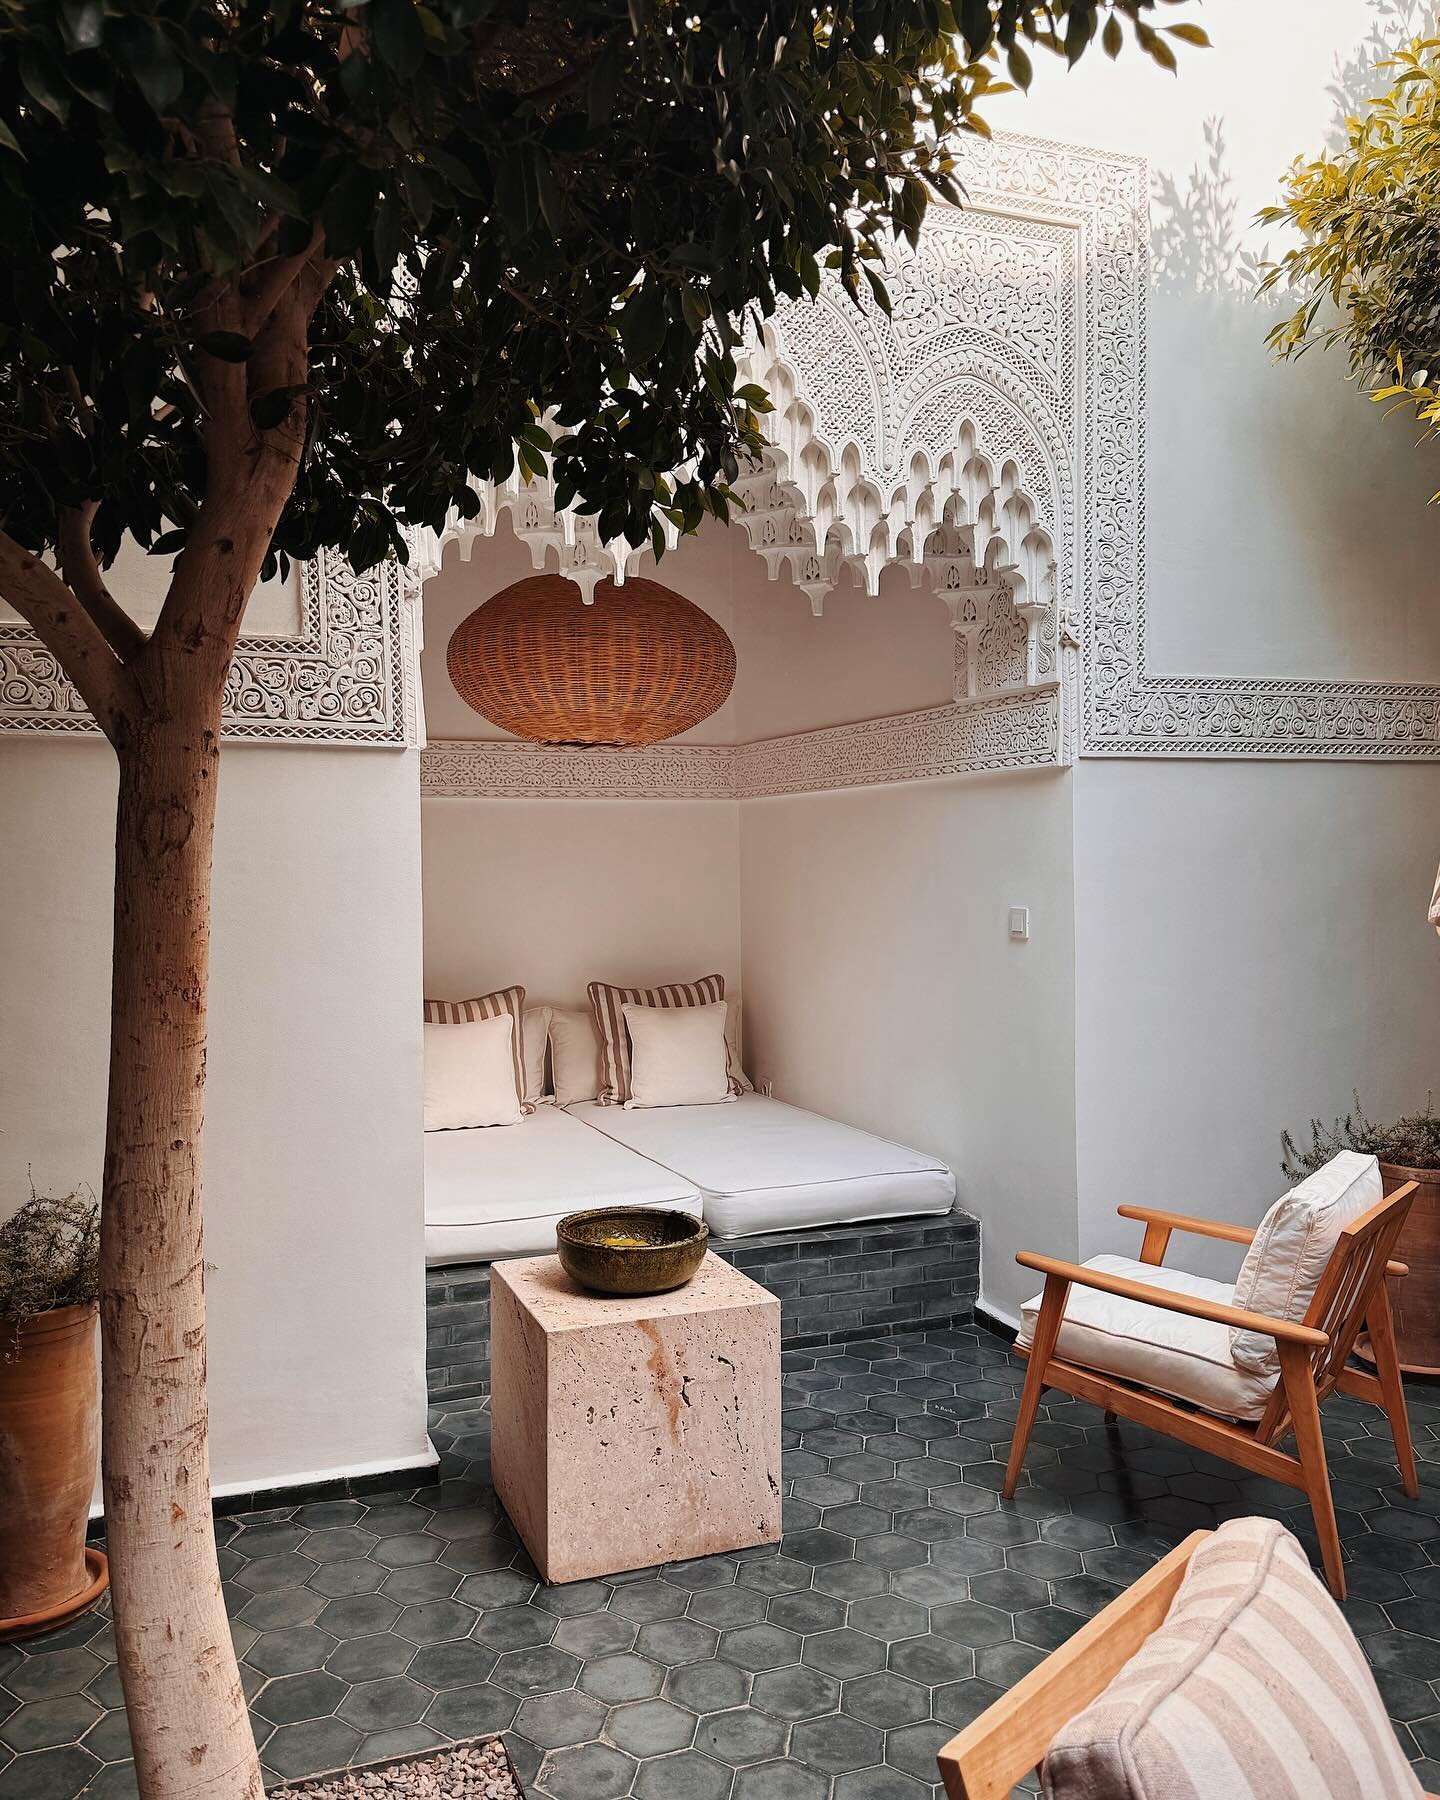 The third and final stop of our honeymoon - @riadno_37. It&rsquo;s quite magical how peaceful and tranquil this space is, given its close proximity to the souks. The level of detail and artisan craftsmanship that went into reviving this beautiful bui